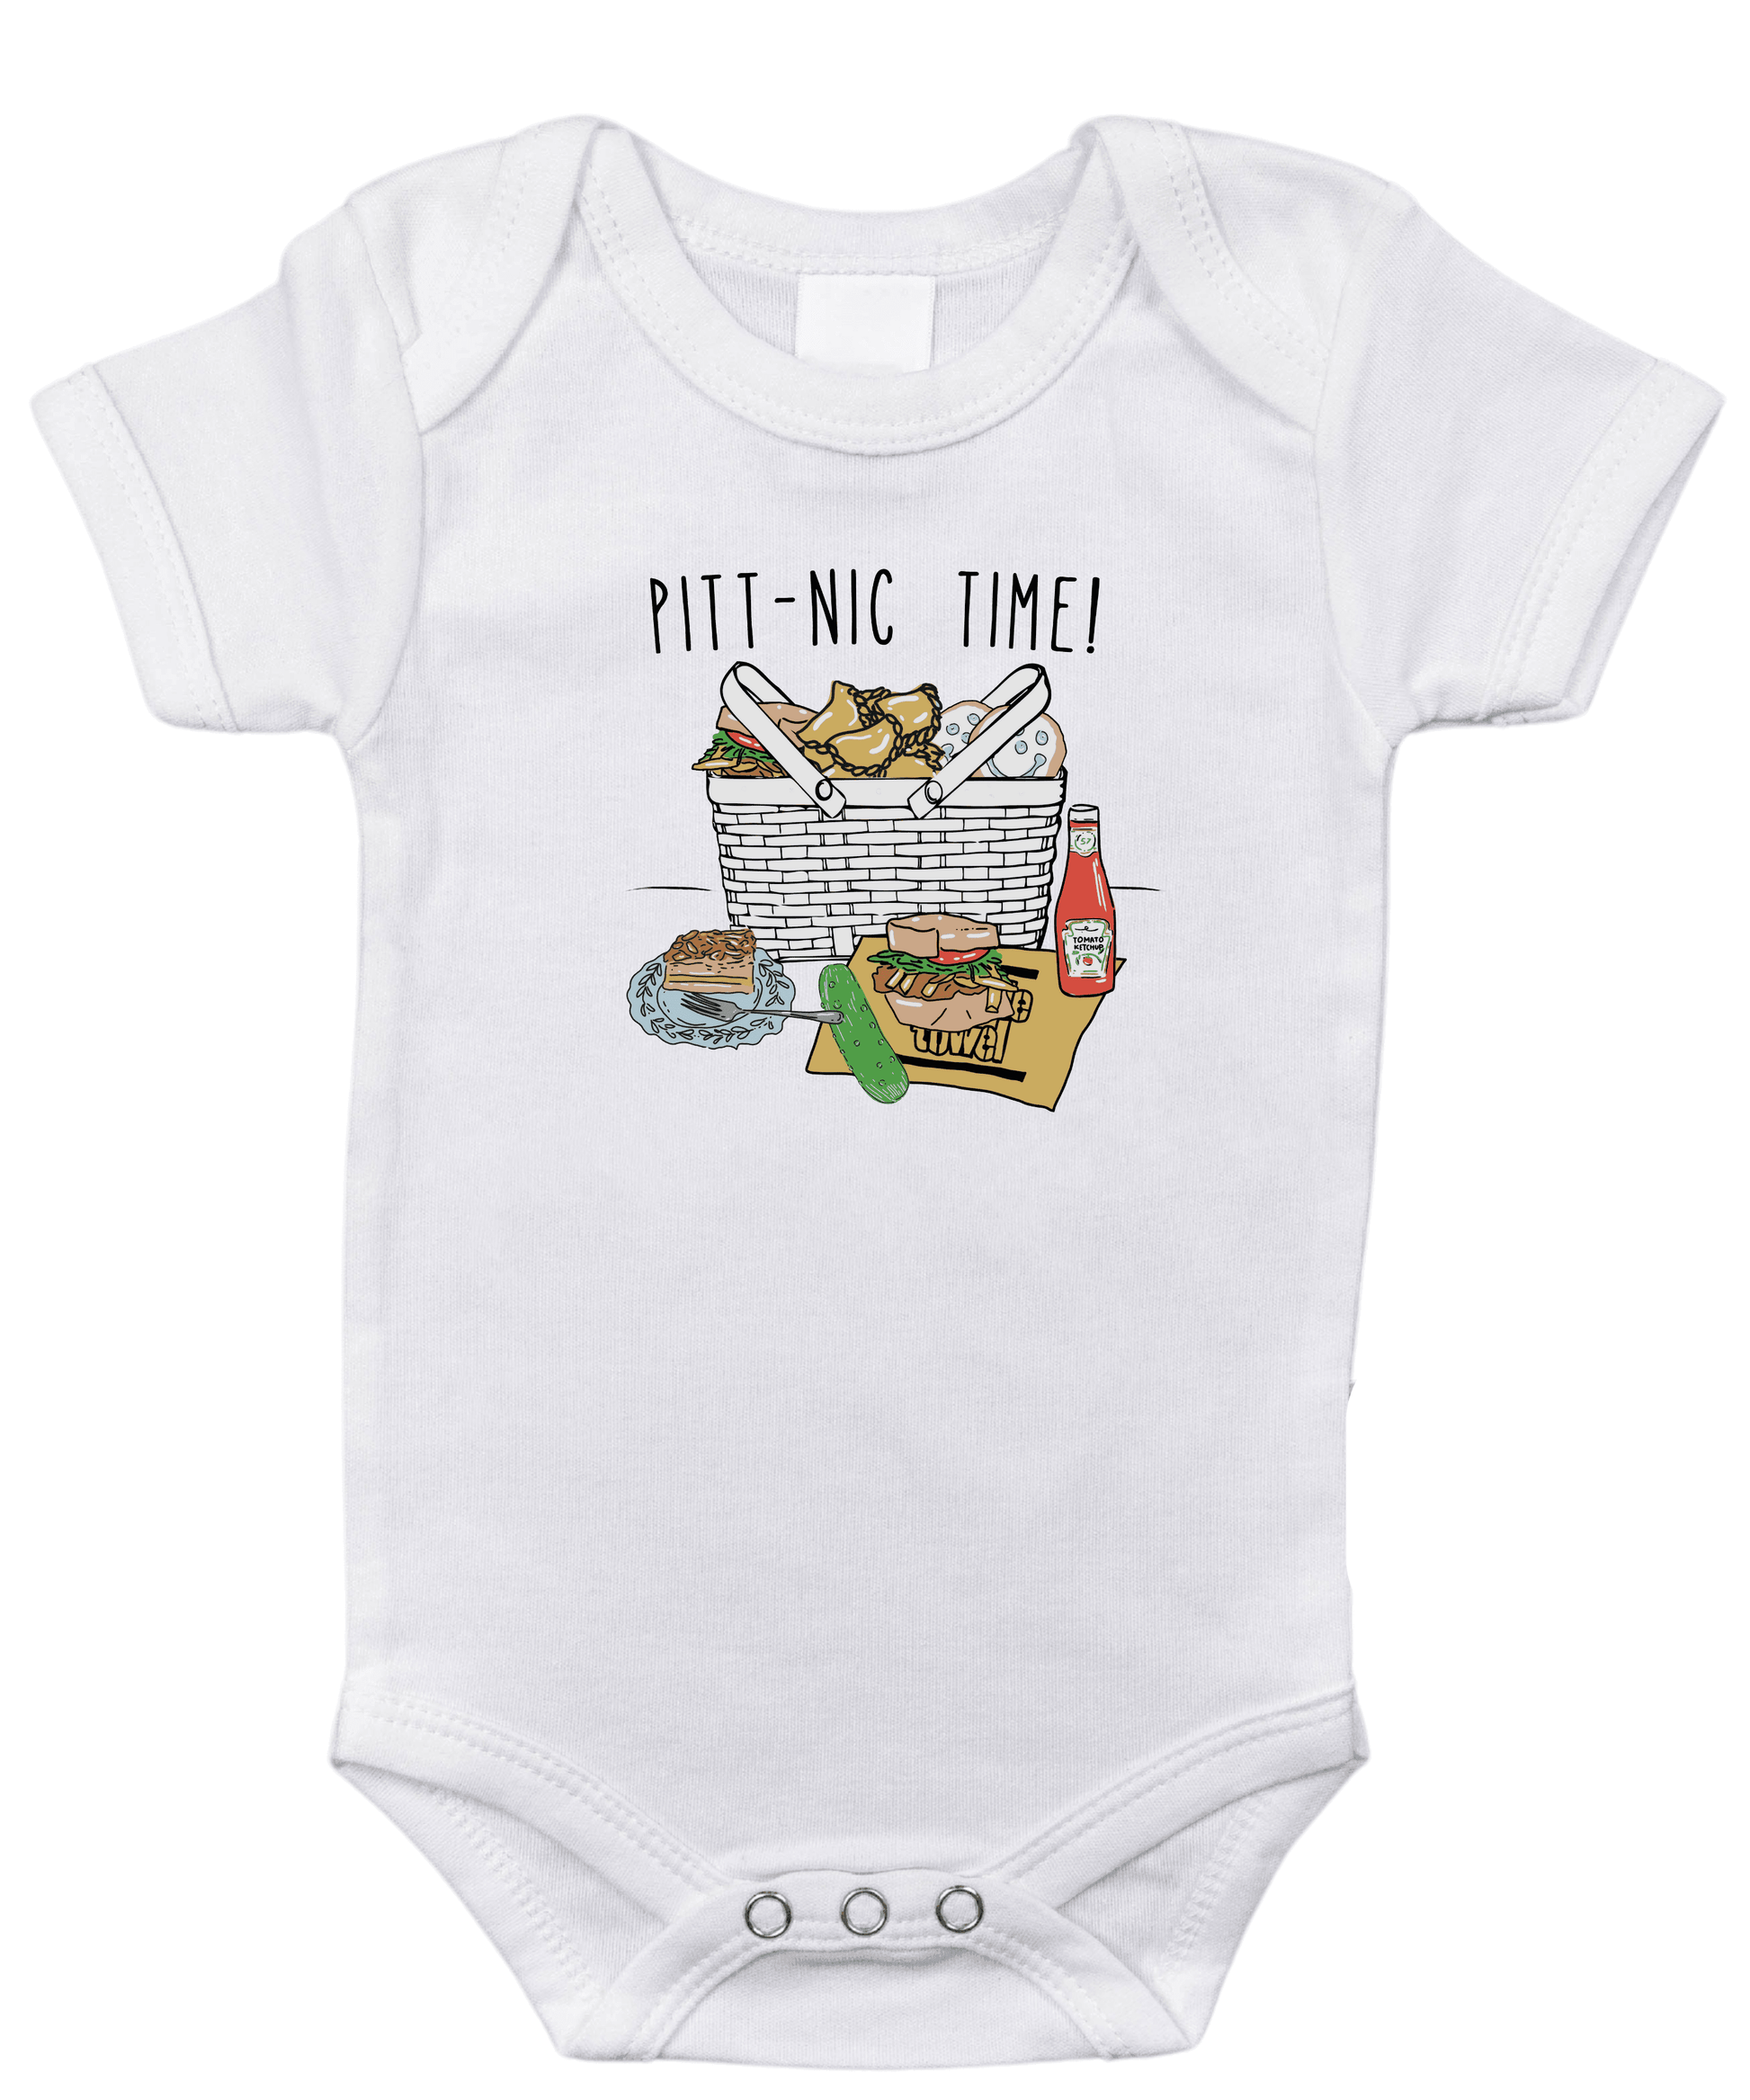 White baby onesie with "Pittsburgh Picnic" text and illustrated pierogi, ketchup bottle, and pickle.